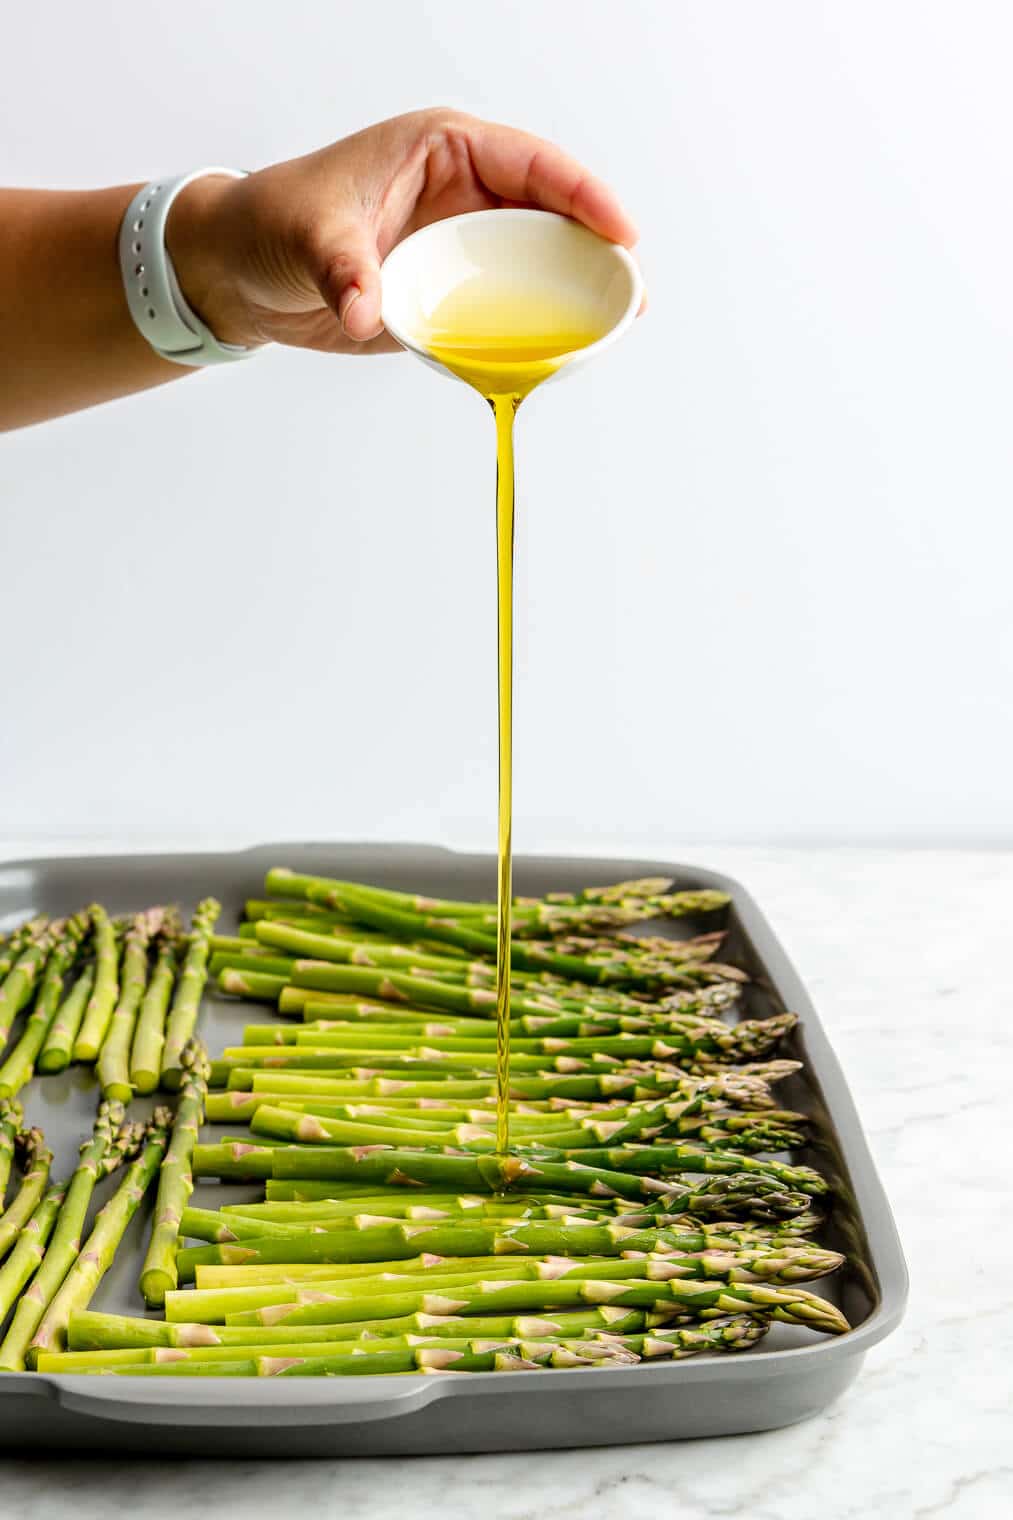 A person pouring a small bowl of olive oil over asparagus on a sheet pan.